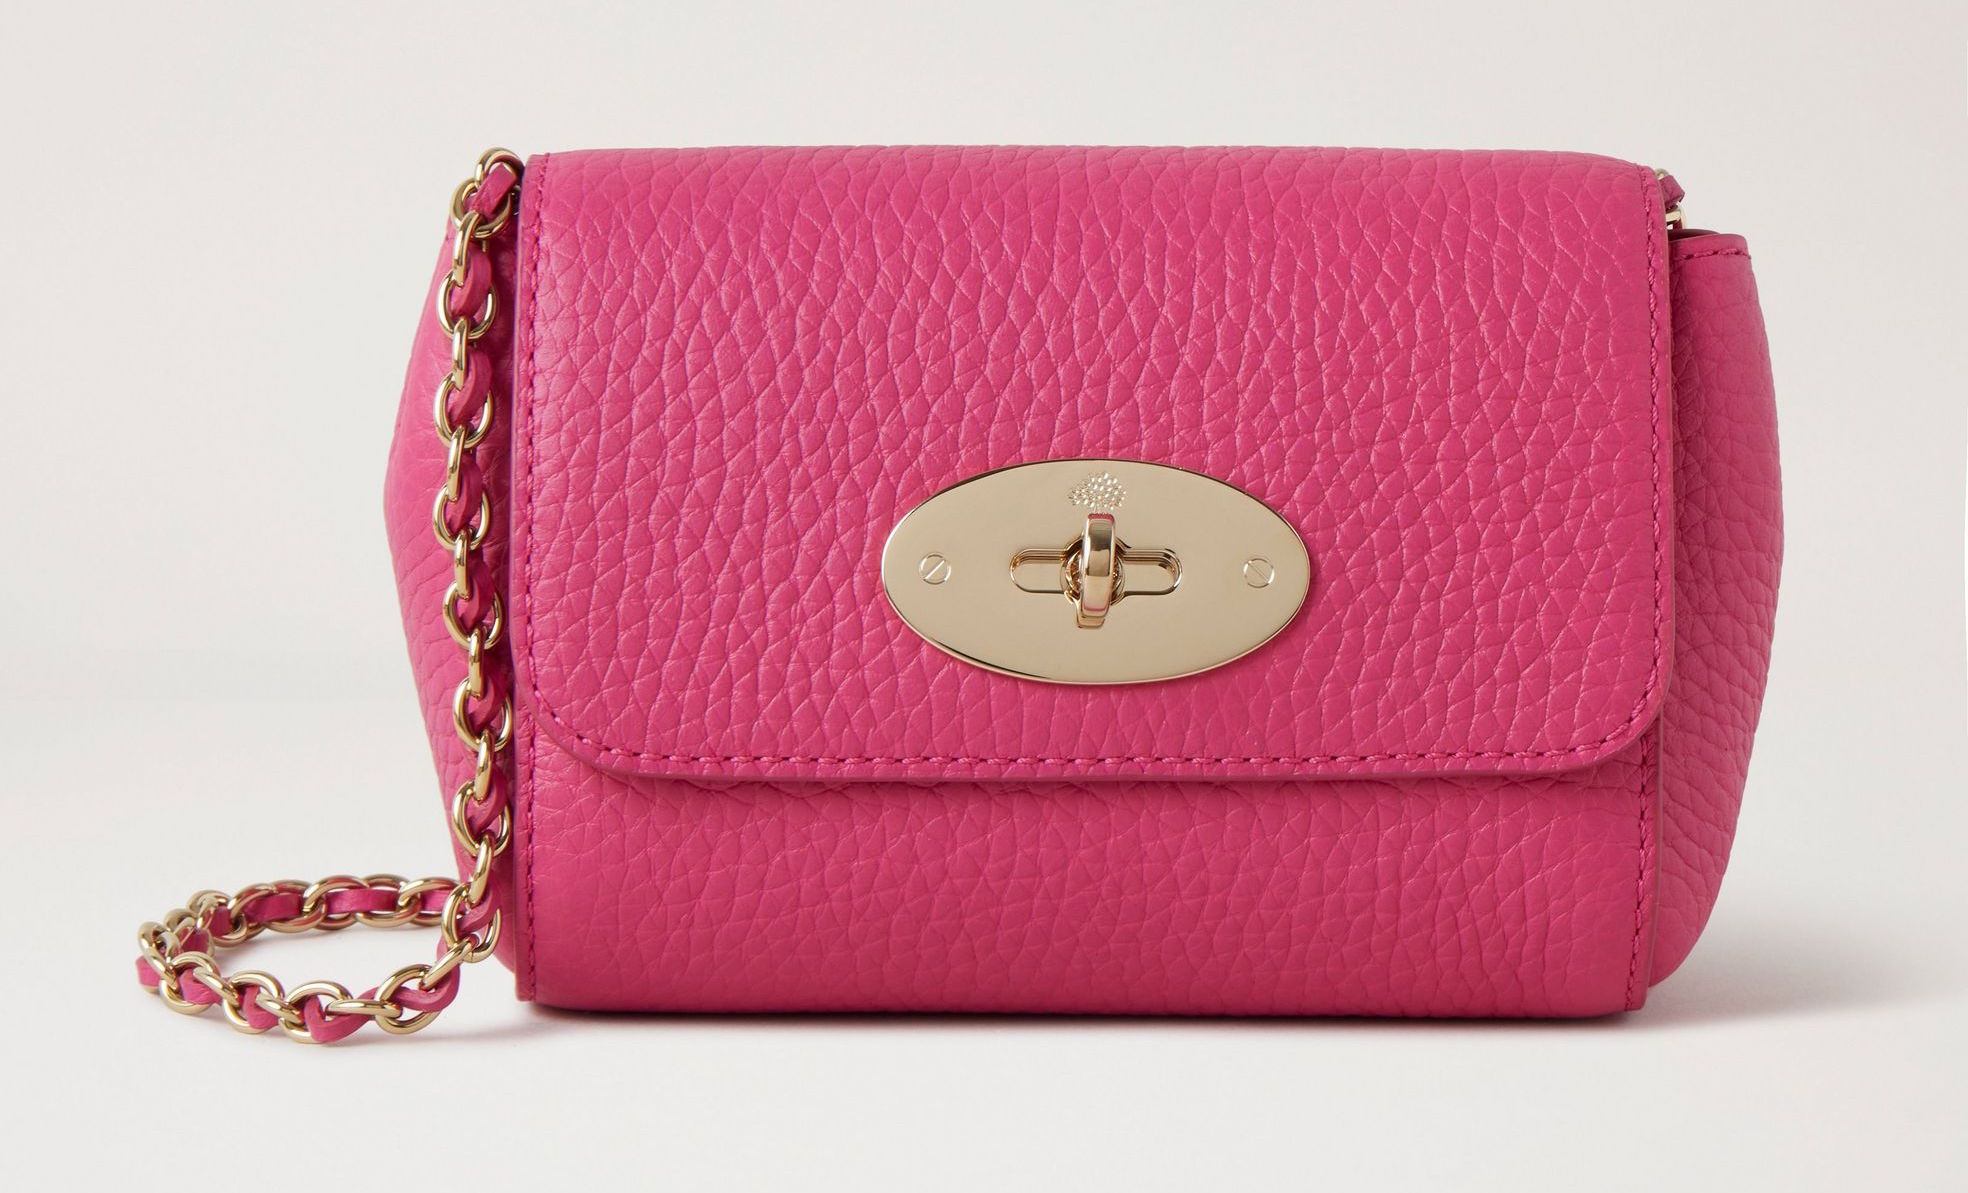 Mulberry Lily Bag Ultimate Buying Guide – Every Size, Style & More